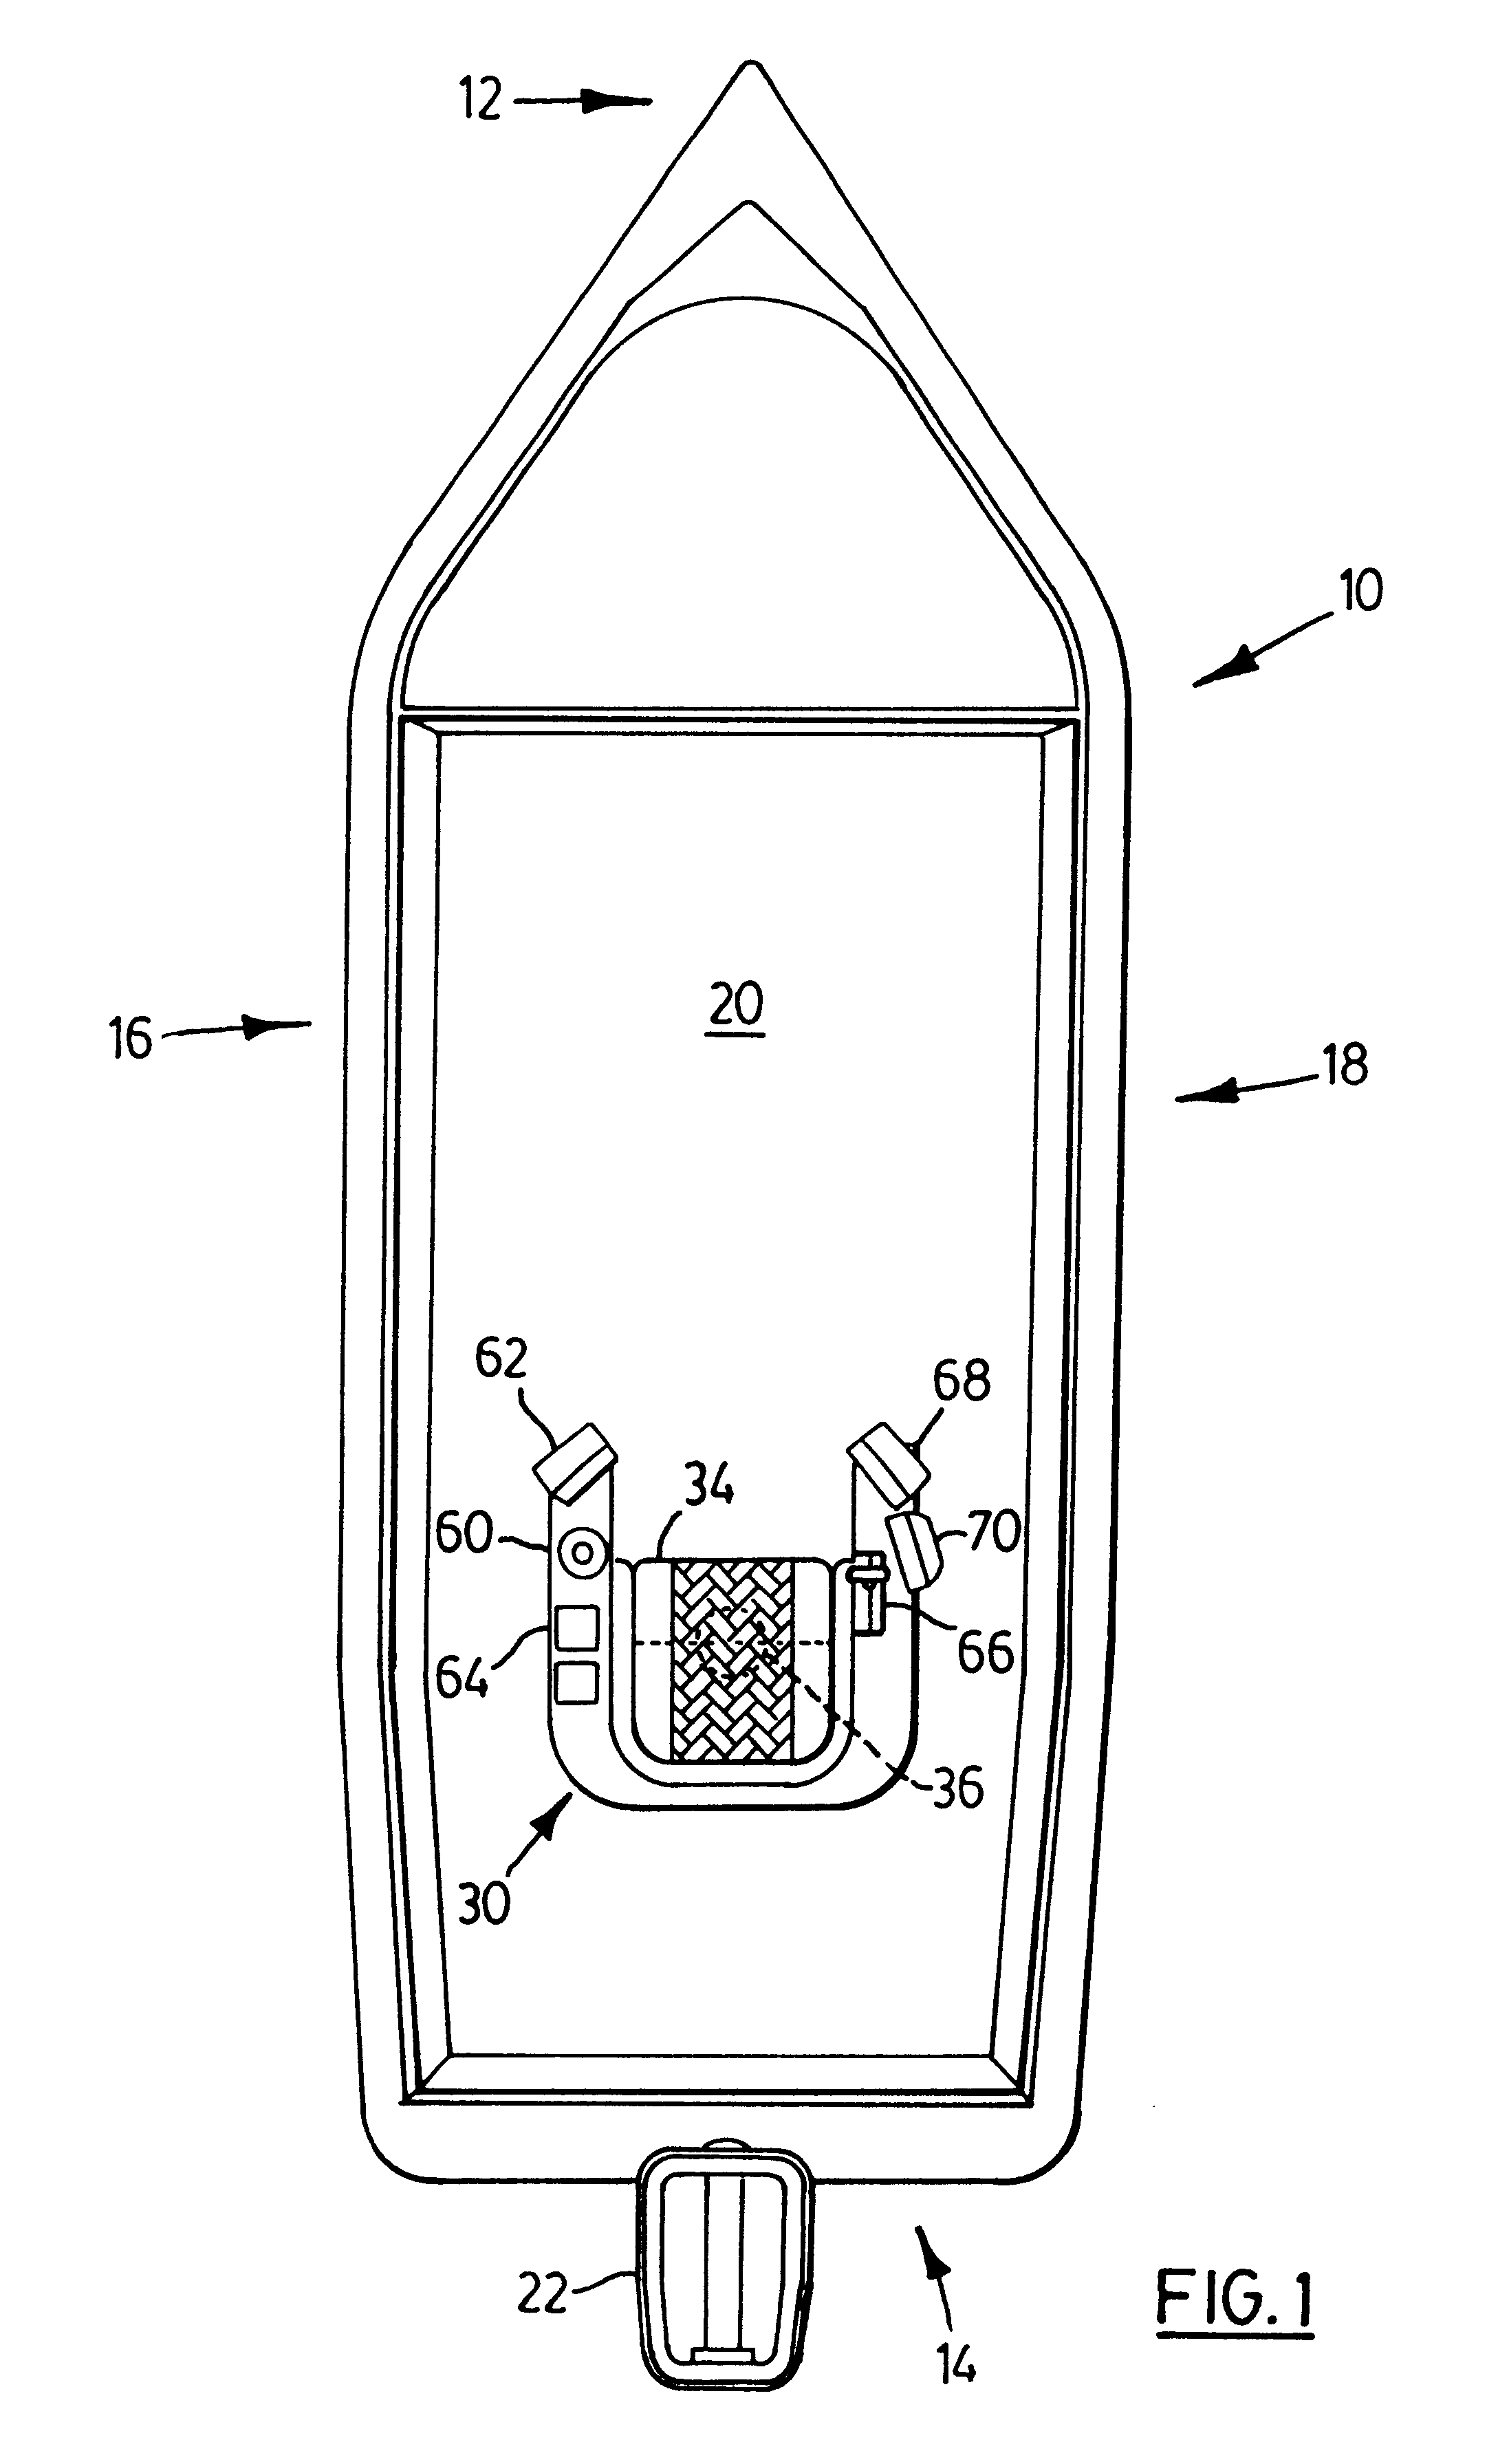 Control console and seating arrangement for motorized watercraft